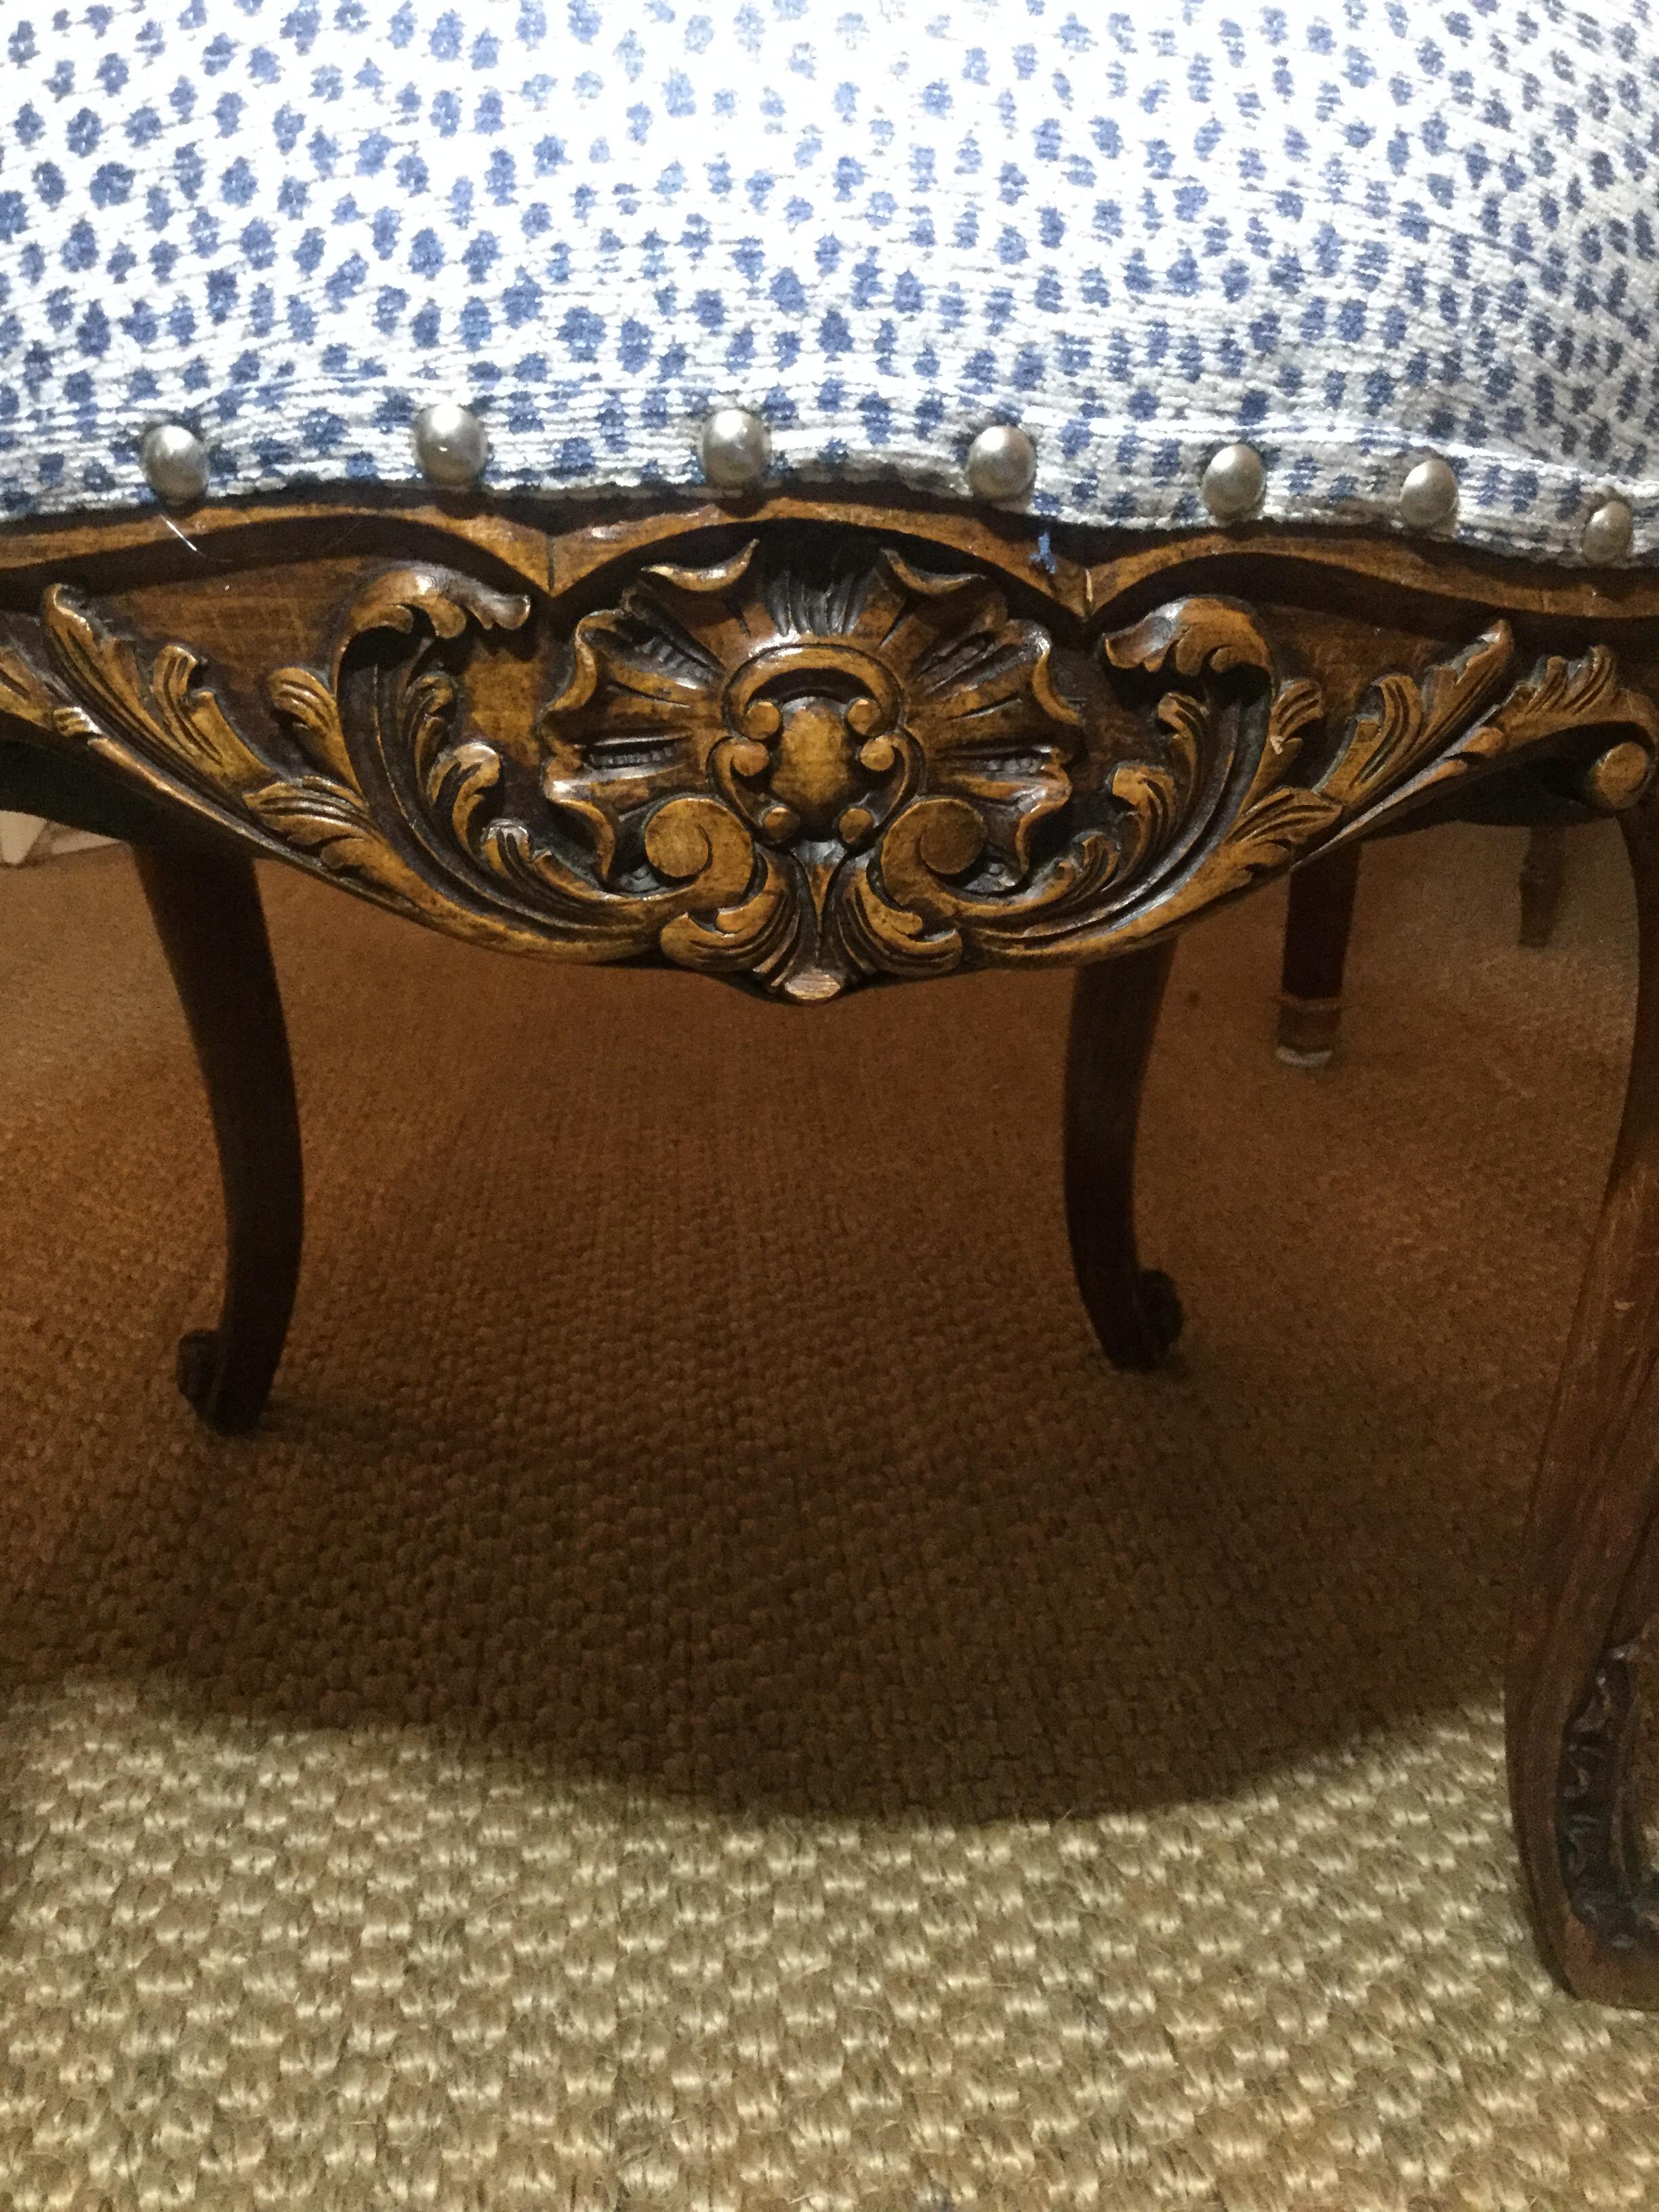 Pair of French Carved Walnut Side Chairs with Cheetah Blue and White Upholstery For Sale 2